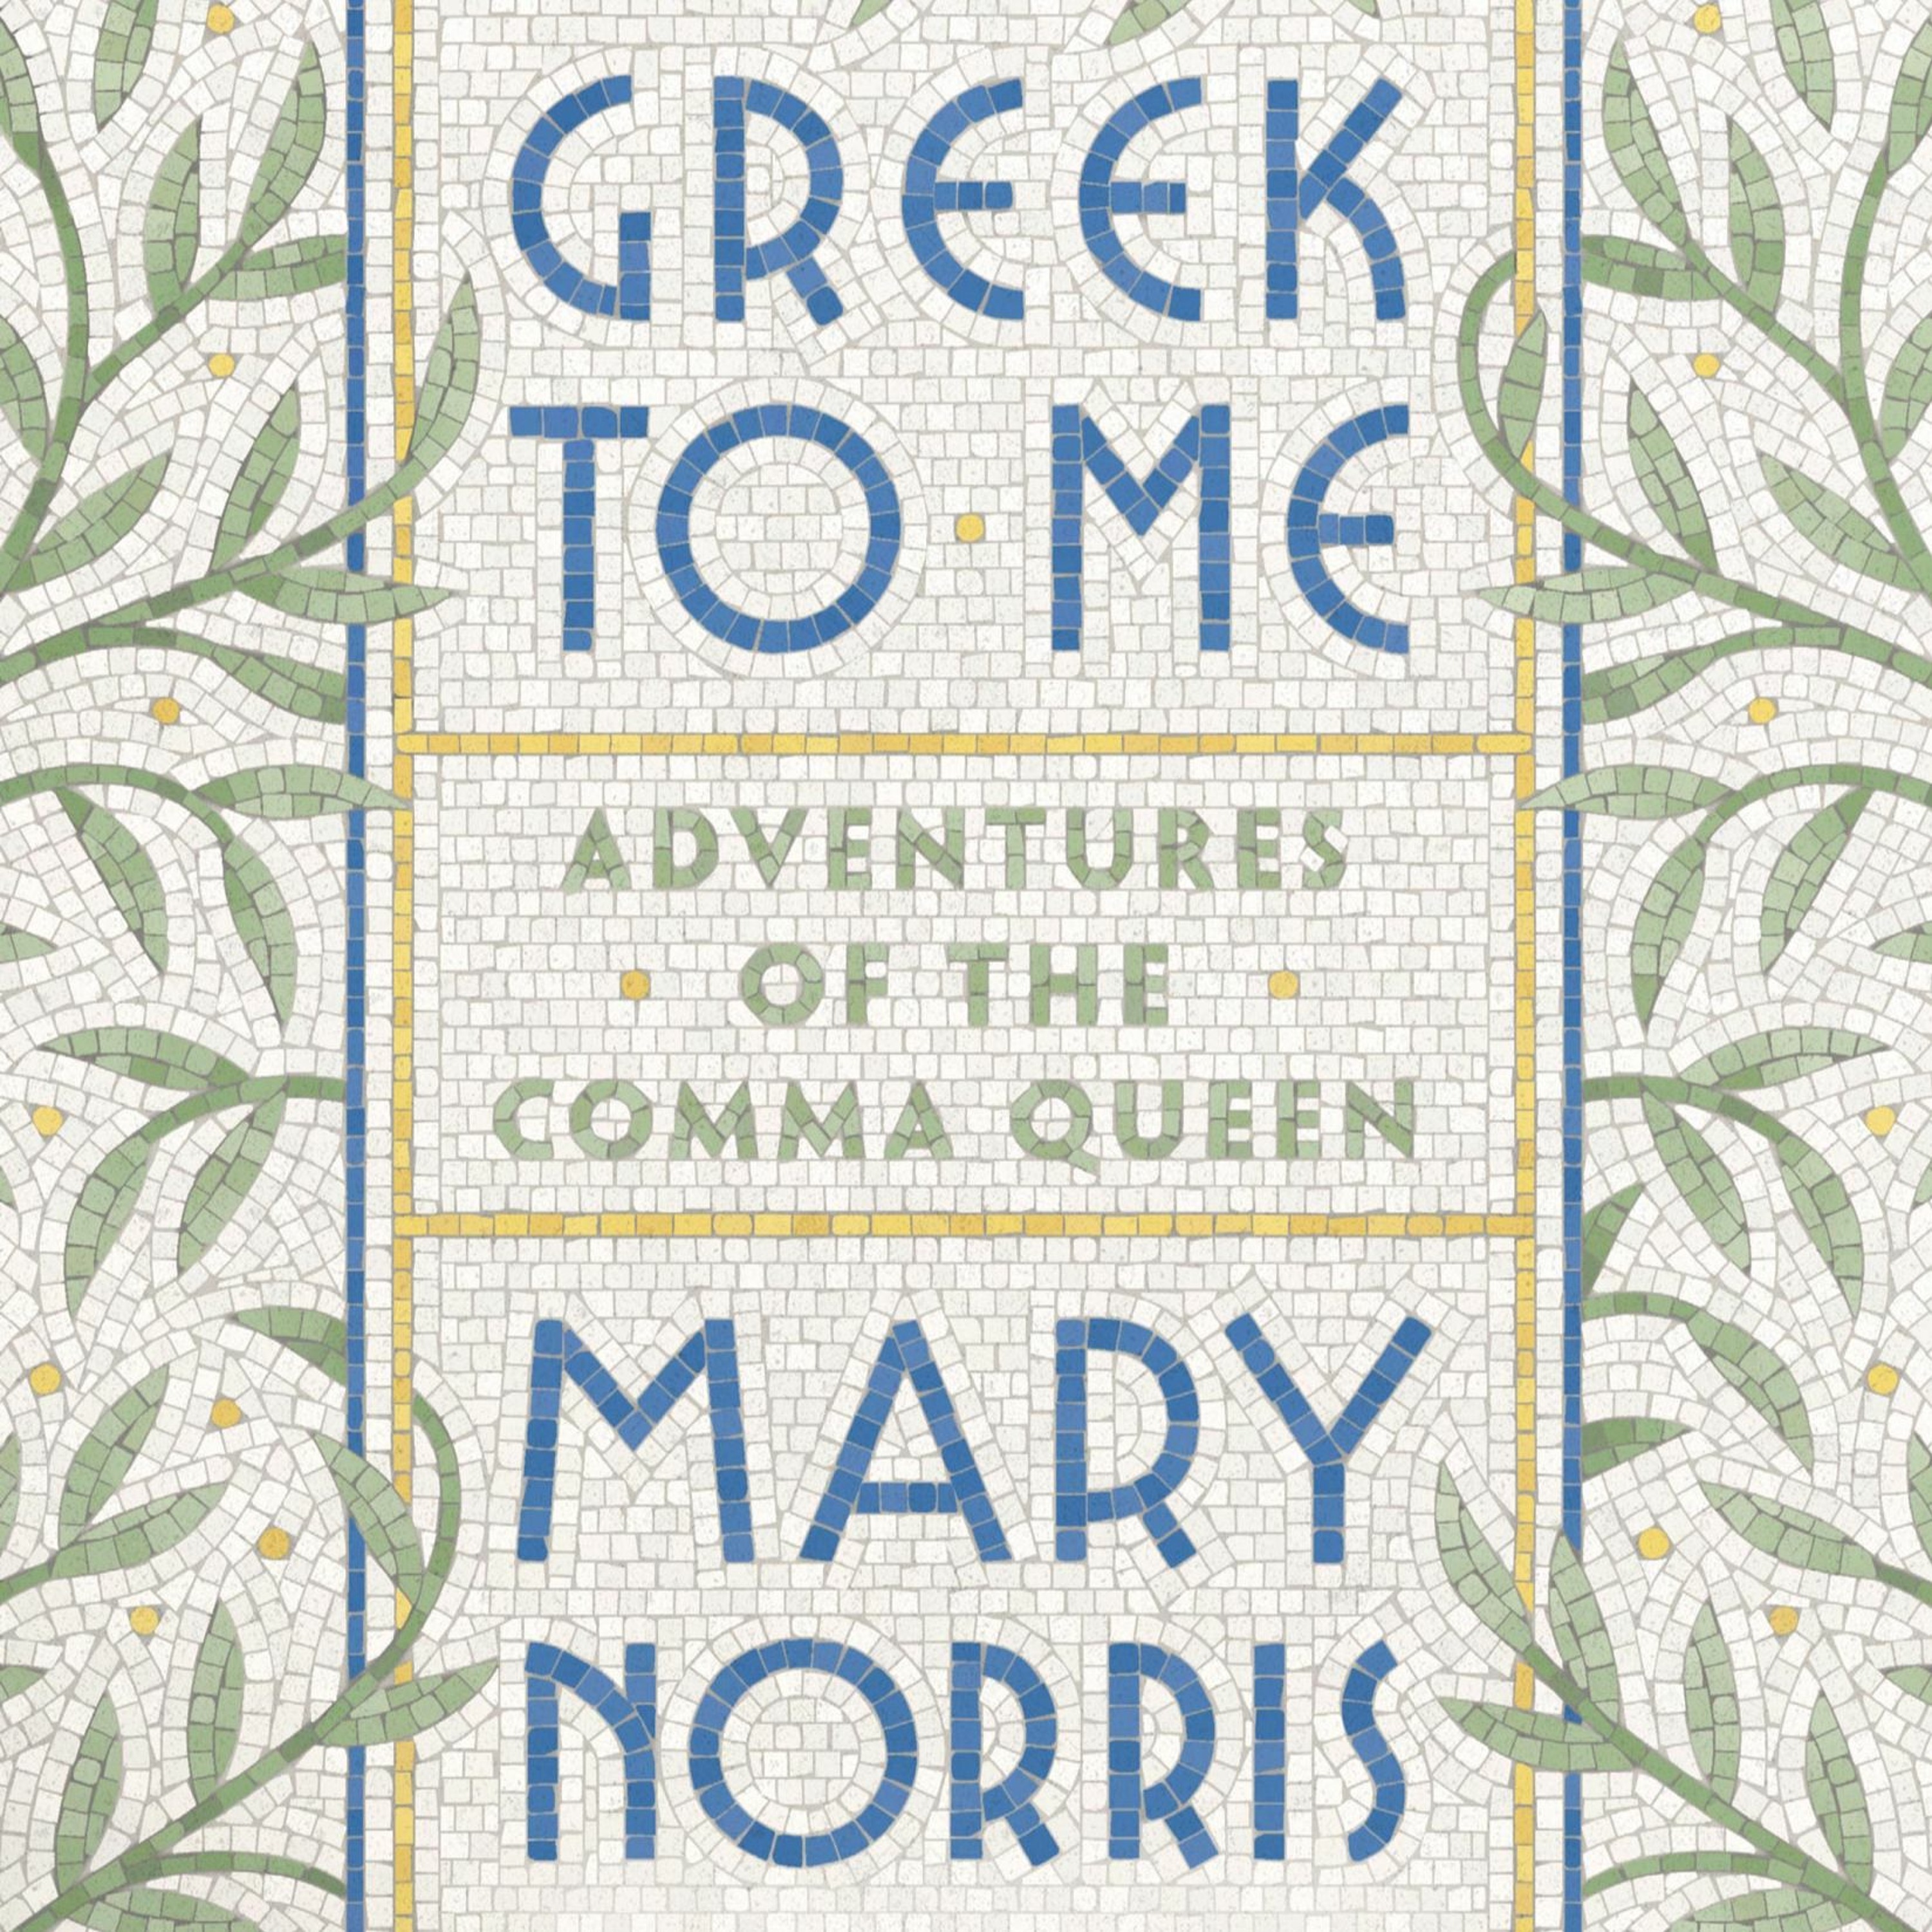 Mary Norris and Gregory Maguire, “Greek to Me: Adventures of the Comma Queen”